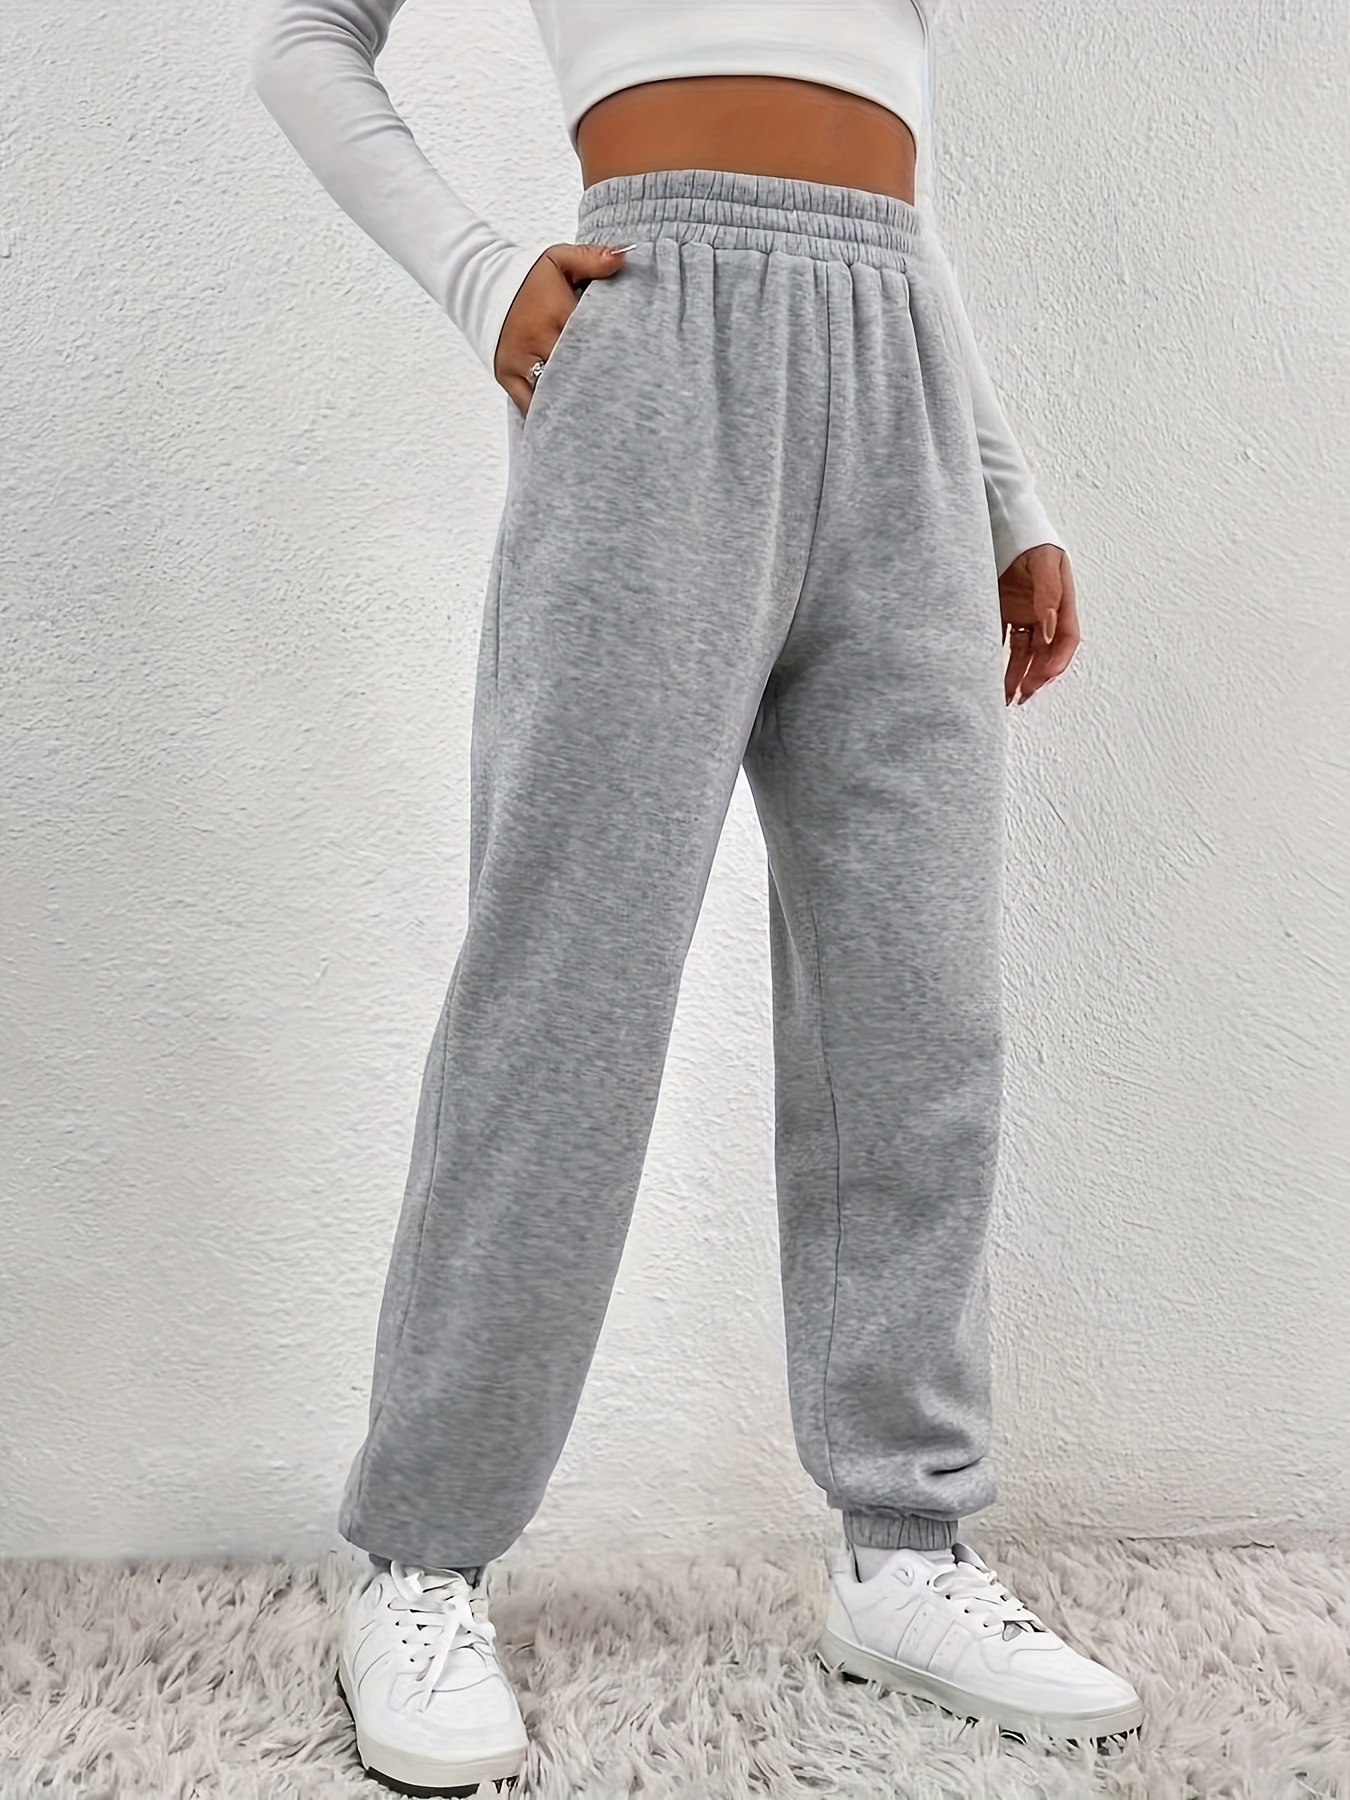 Womens Sweatpants with Pockets Bottom Sweatpants for Women with